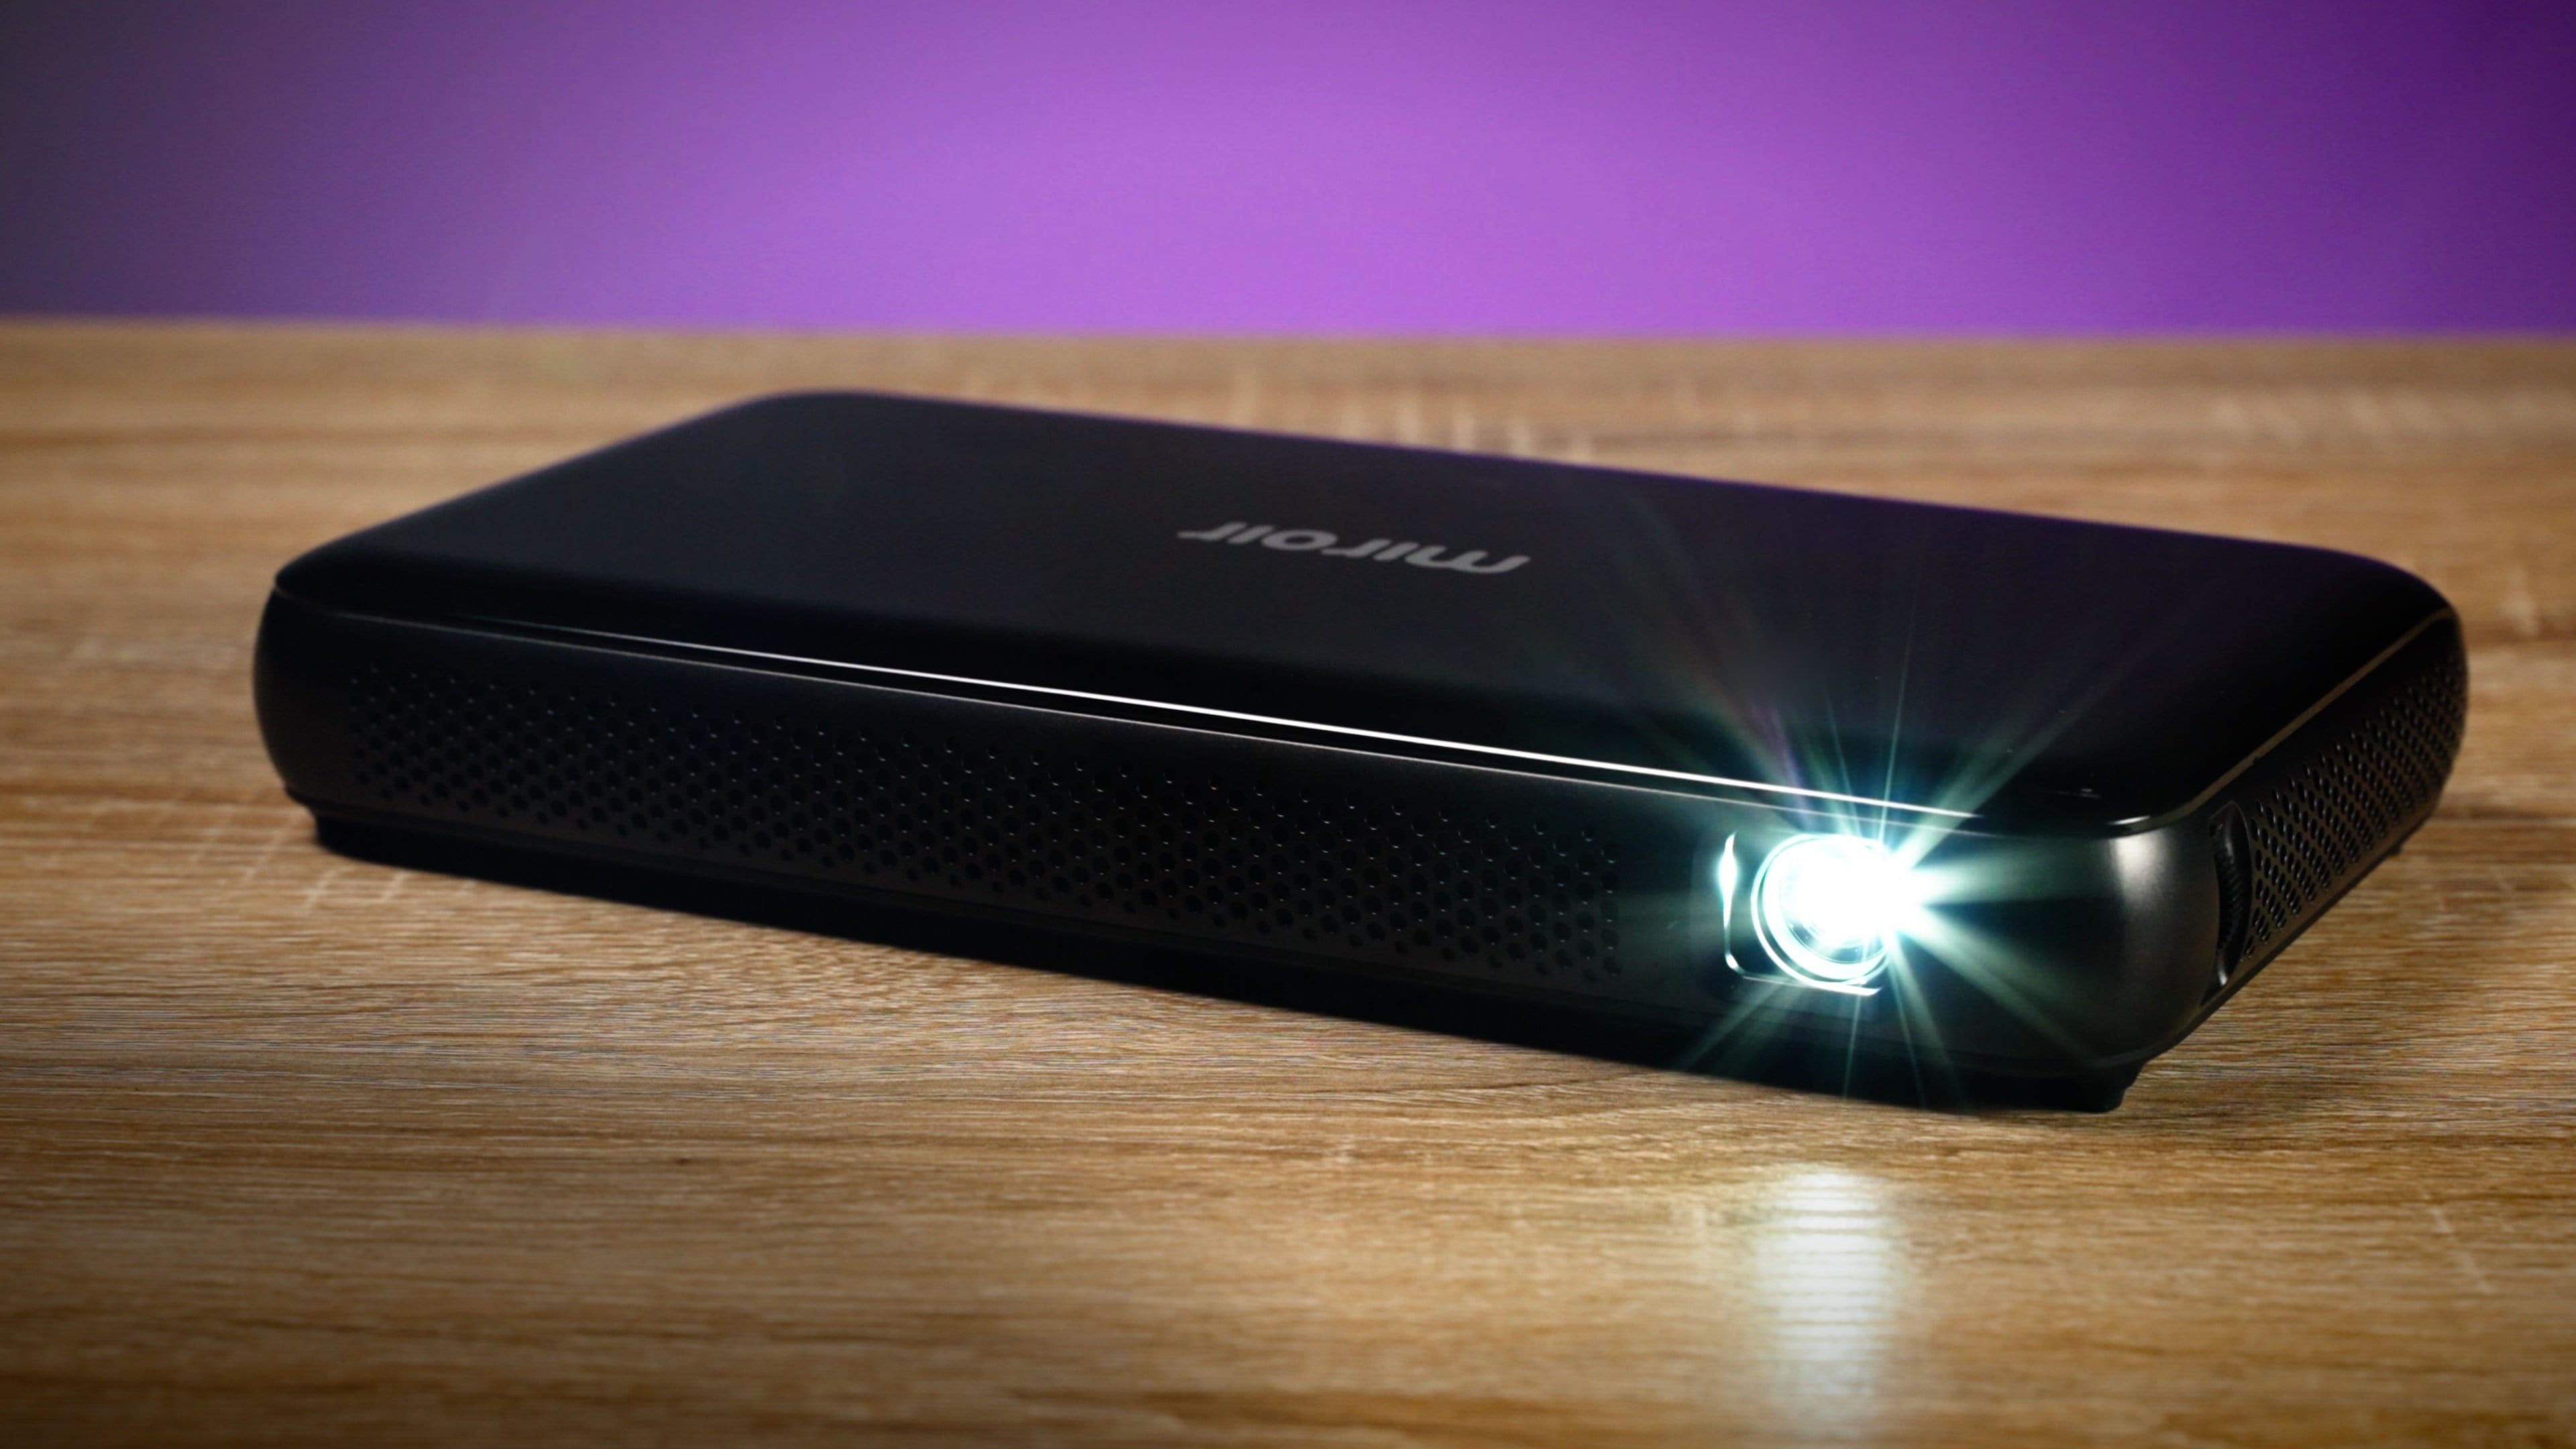 The Miroir M600 Full HD Pro 1080p projector is a compact and powerful device that offers stunning visuals and effortless connectivity.